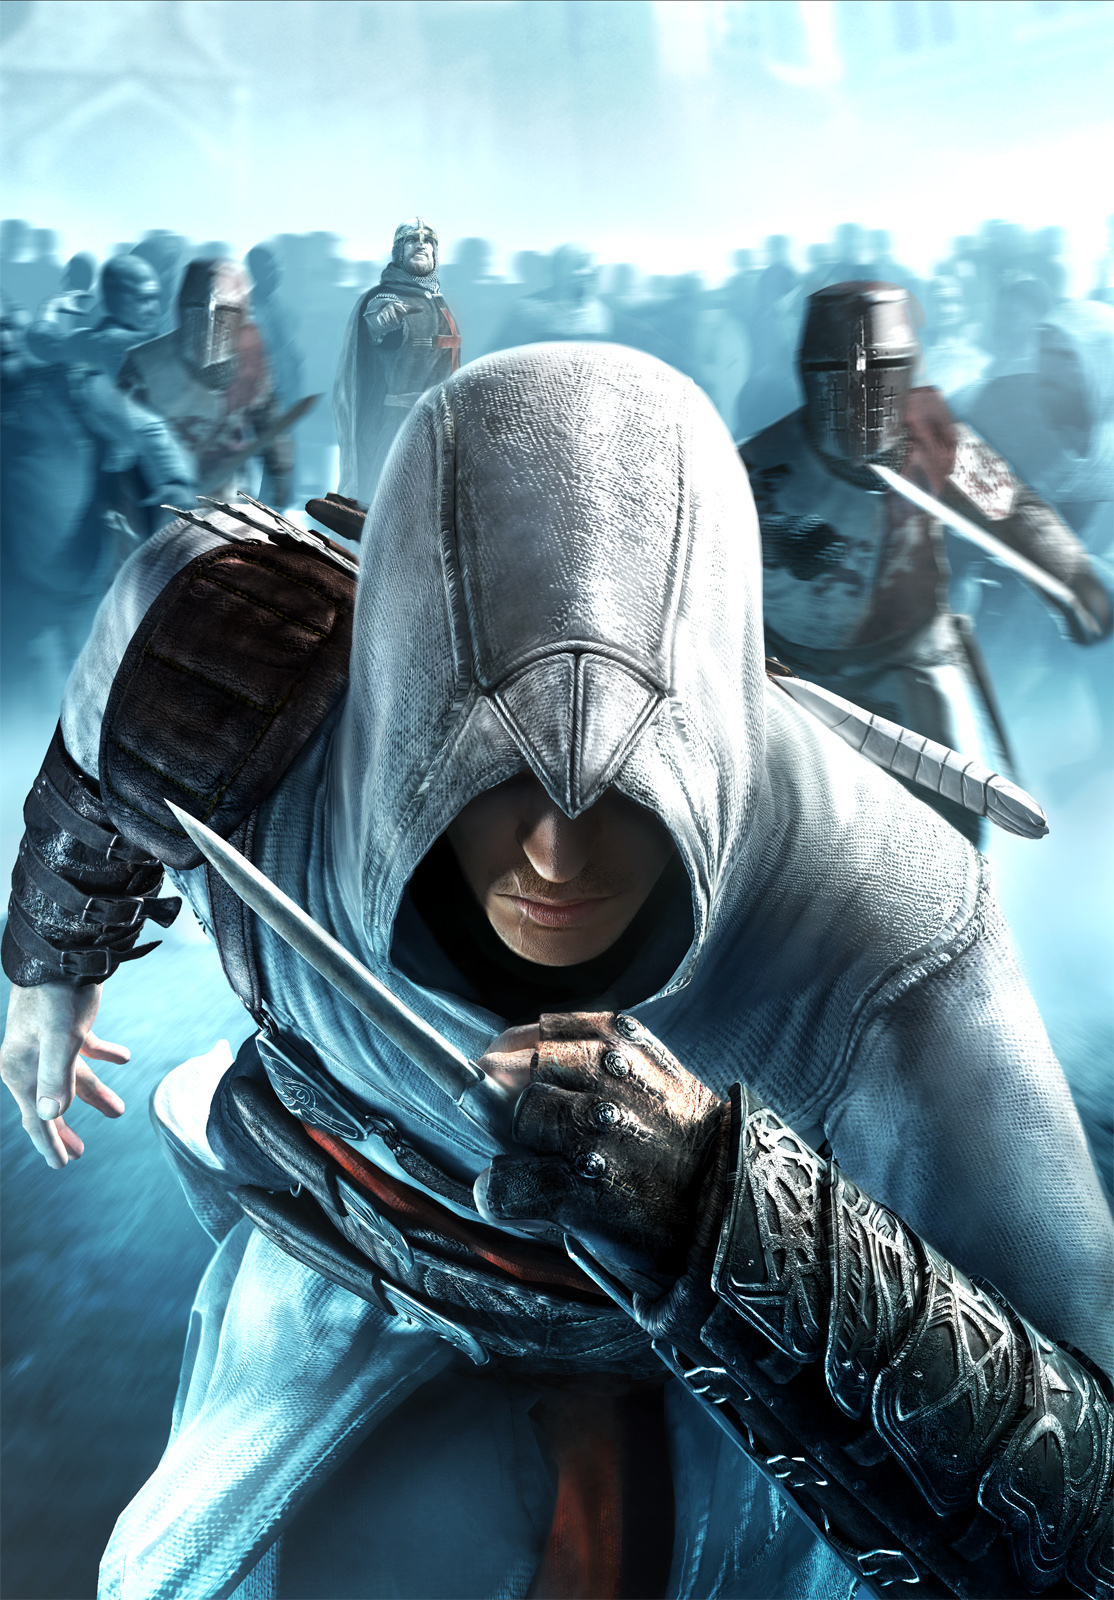 games, assassin's creed, men Free Stock Photo